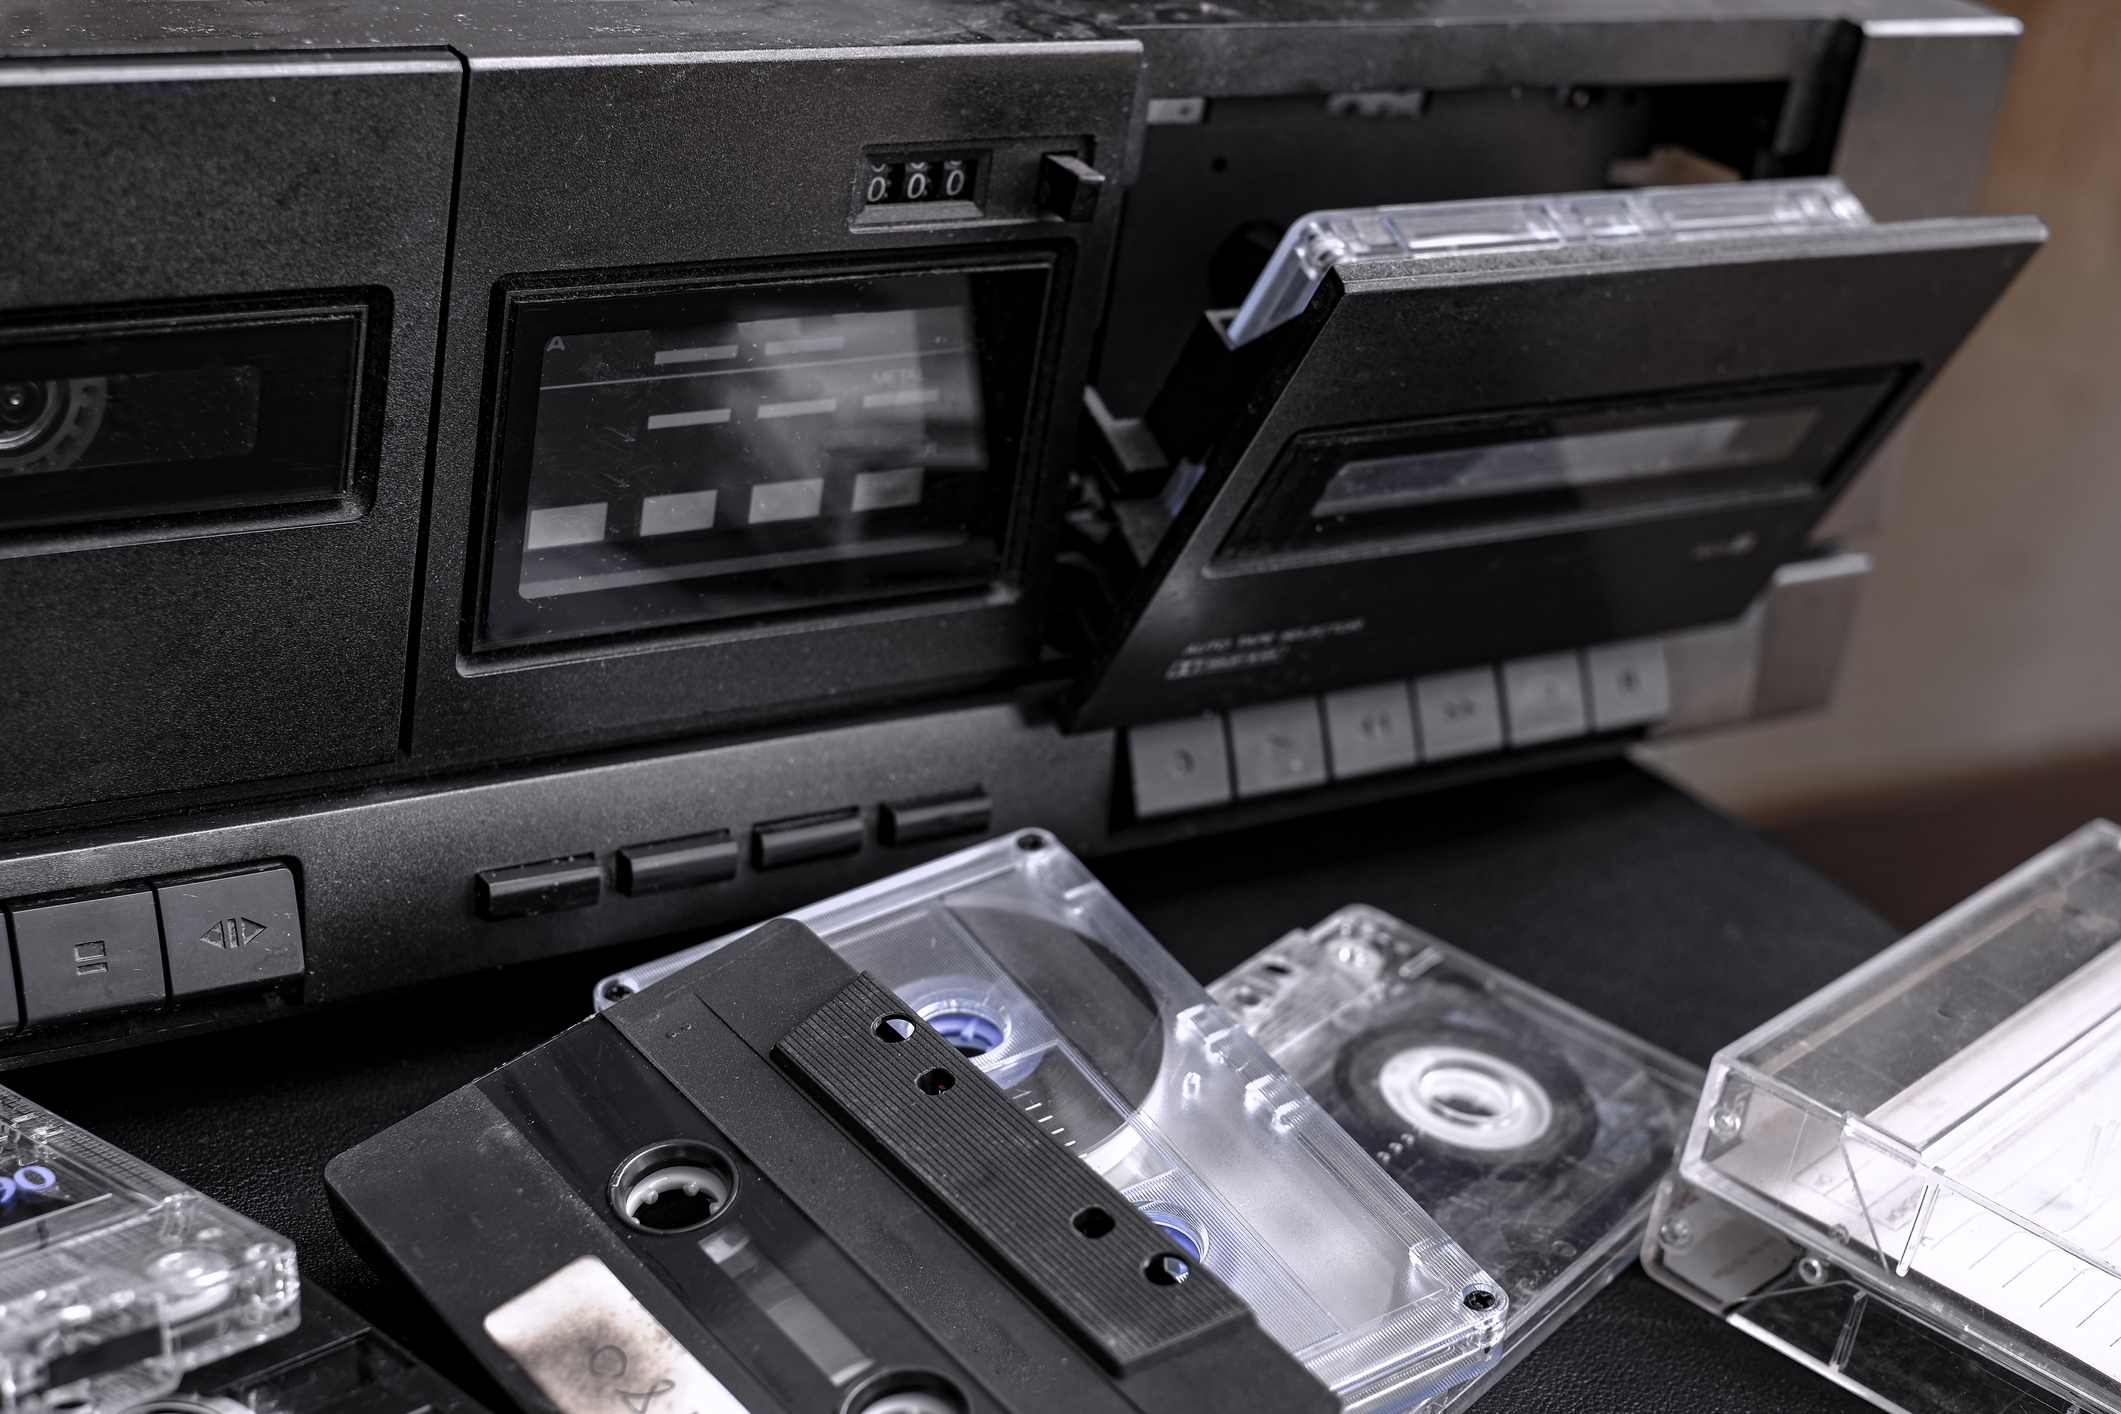 Cassette tapes next to a boombox